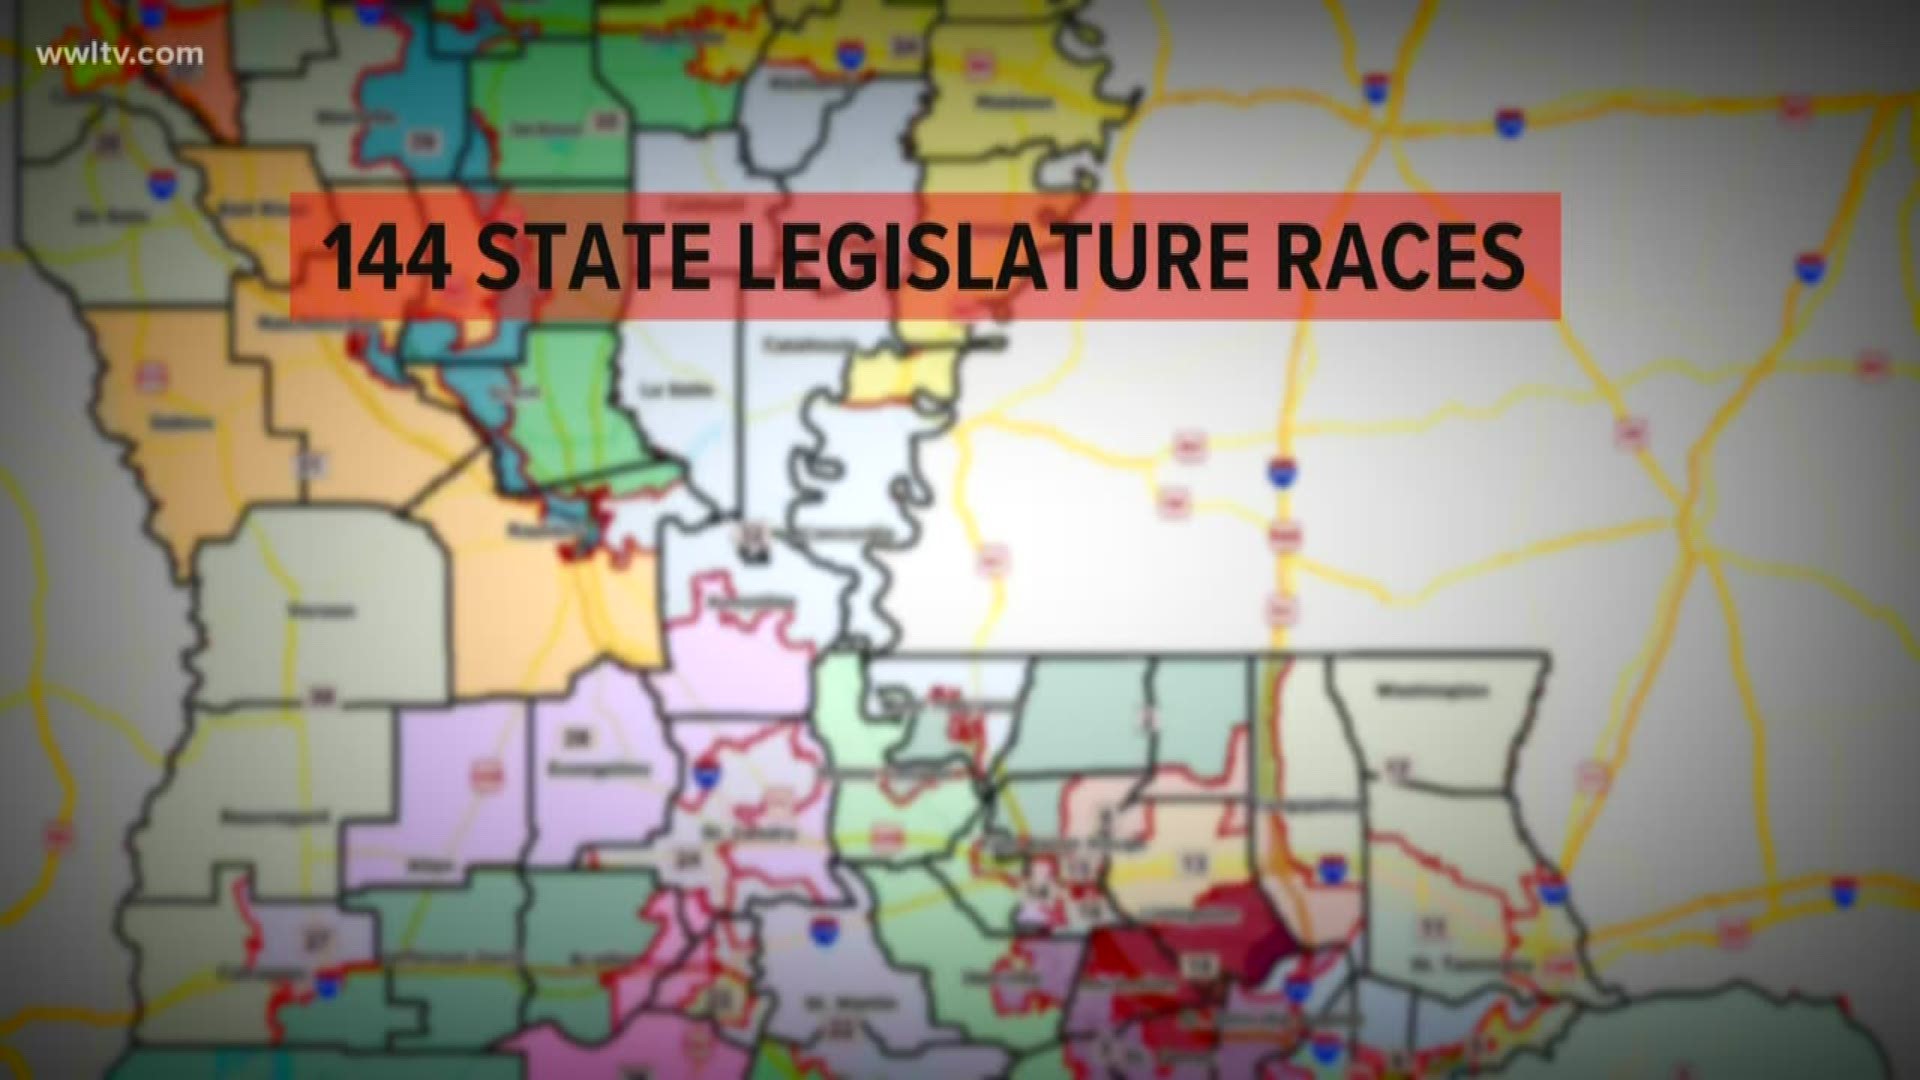 With most of the focus on the governor's race, many forget just how important state representatives have on voters' day-to-day lives.